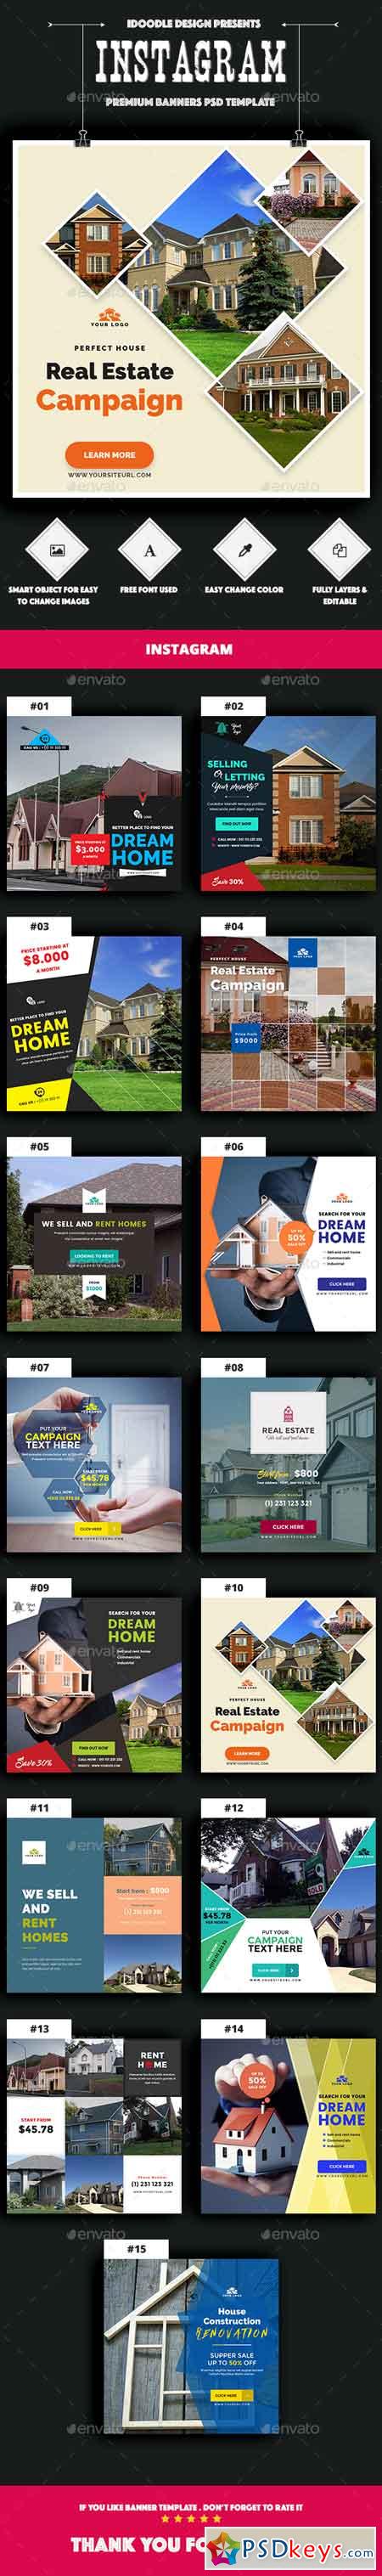 Real Estate Instagram Banners Ads - 15 PSD 15862048